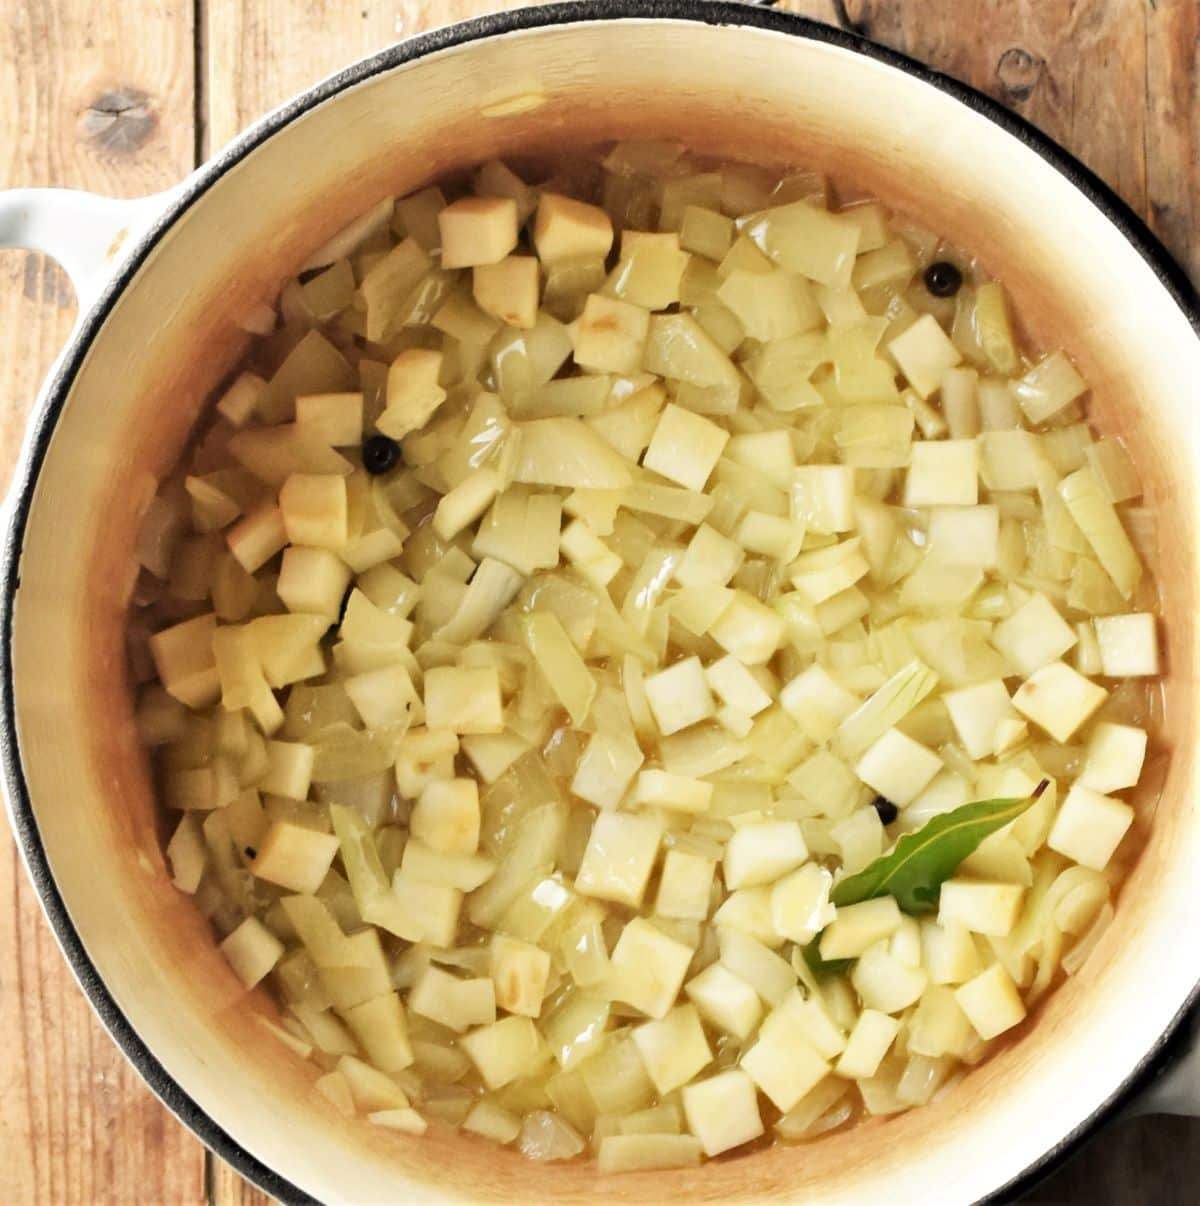 Diced onion and celery root with bay leaf cooking in pot.